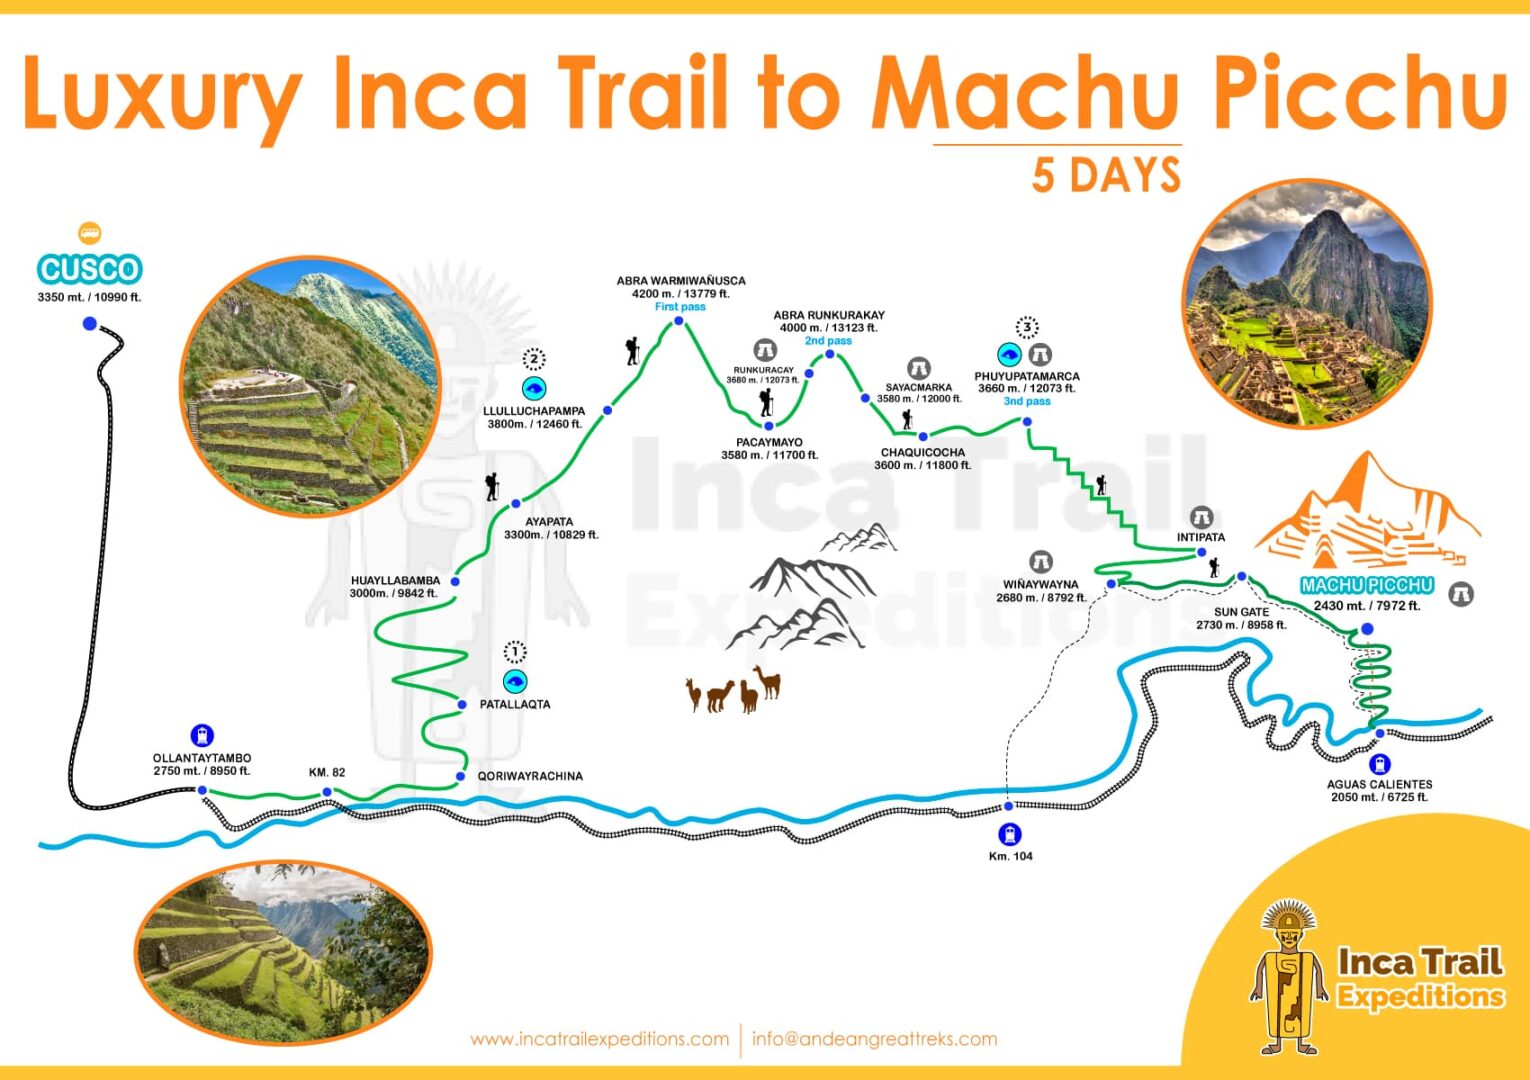 LUXURY-INCA-TRAIL-HIKE-TO-MACHU-PICCHU-BY-INCA-TRAIL-EXPEDITIONS